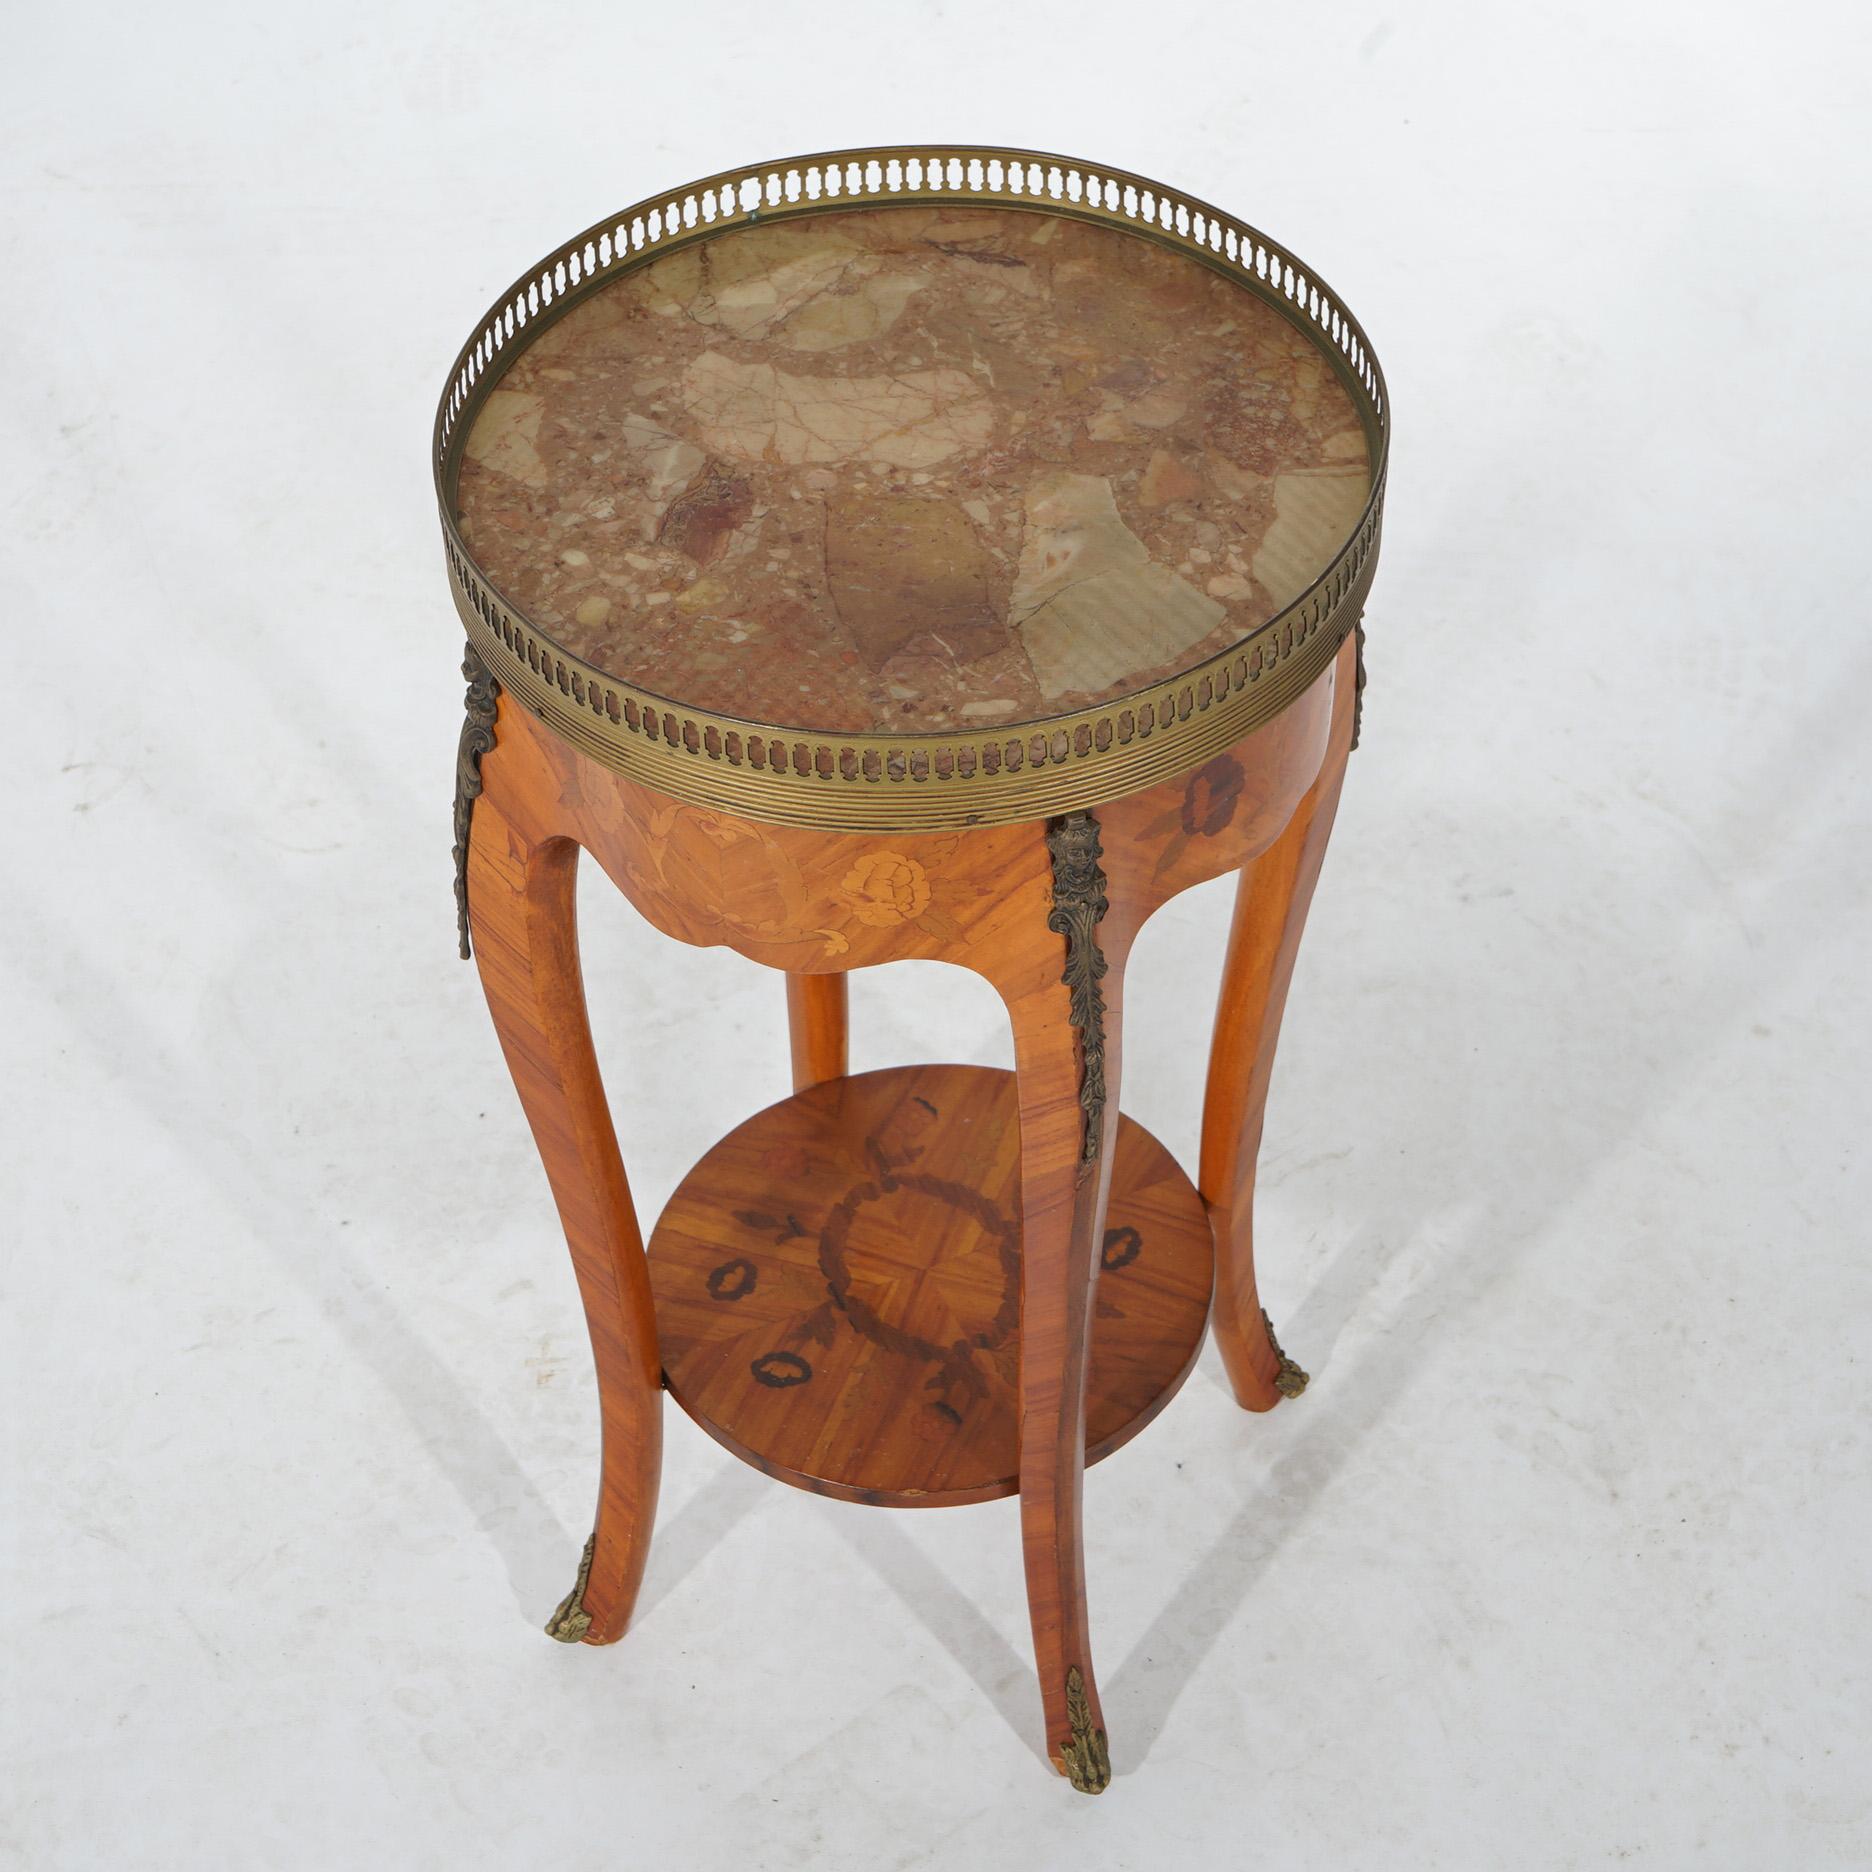 French Louis XVI Style Satinwood, Inlaid Marquetry & Rouge Marble Top Table with Pierced Gallery & Cabriole Legs, c1930

Measures- 24''H x 14.25''W x 14.25''D